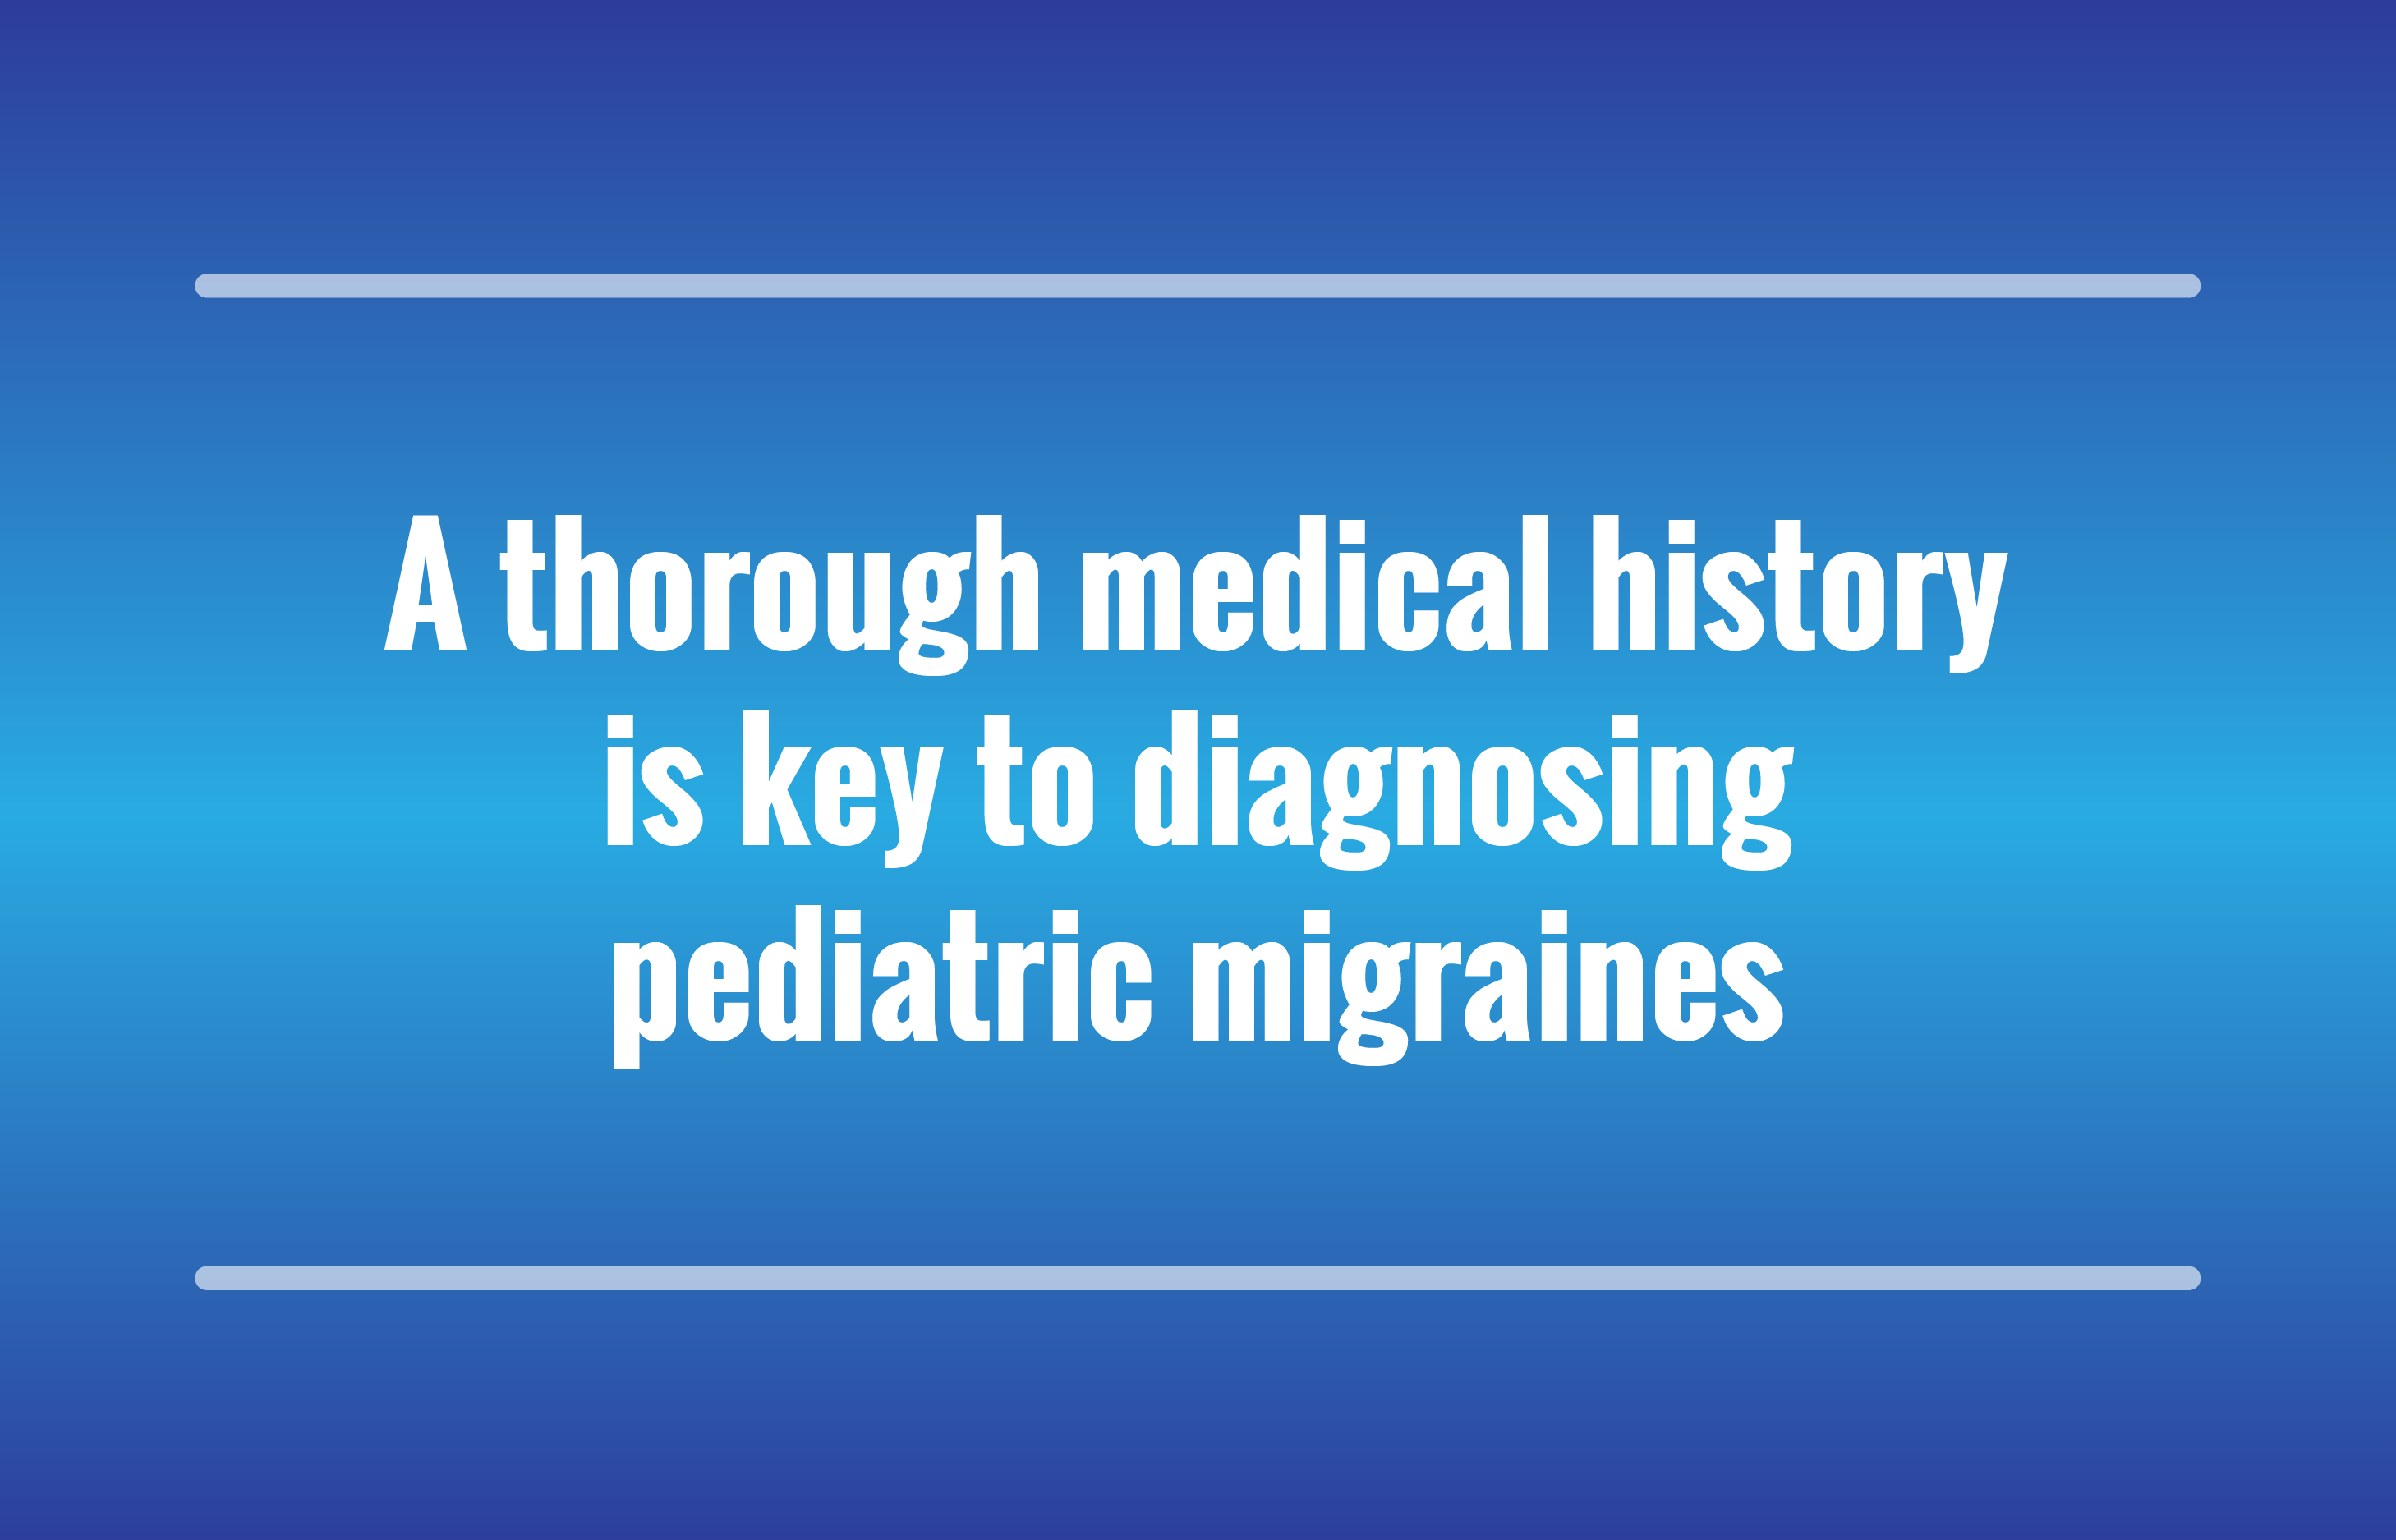 8 questions for a thorough history to diagnose migraines